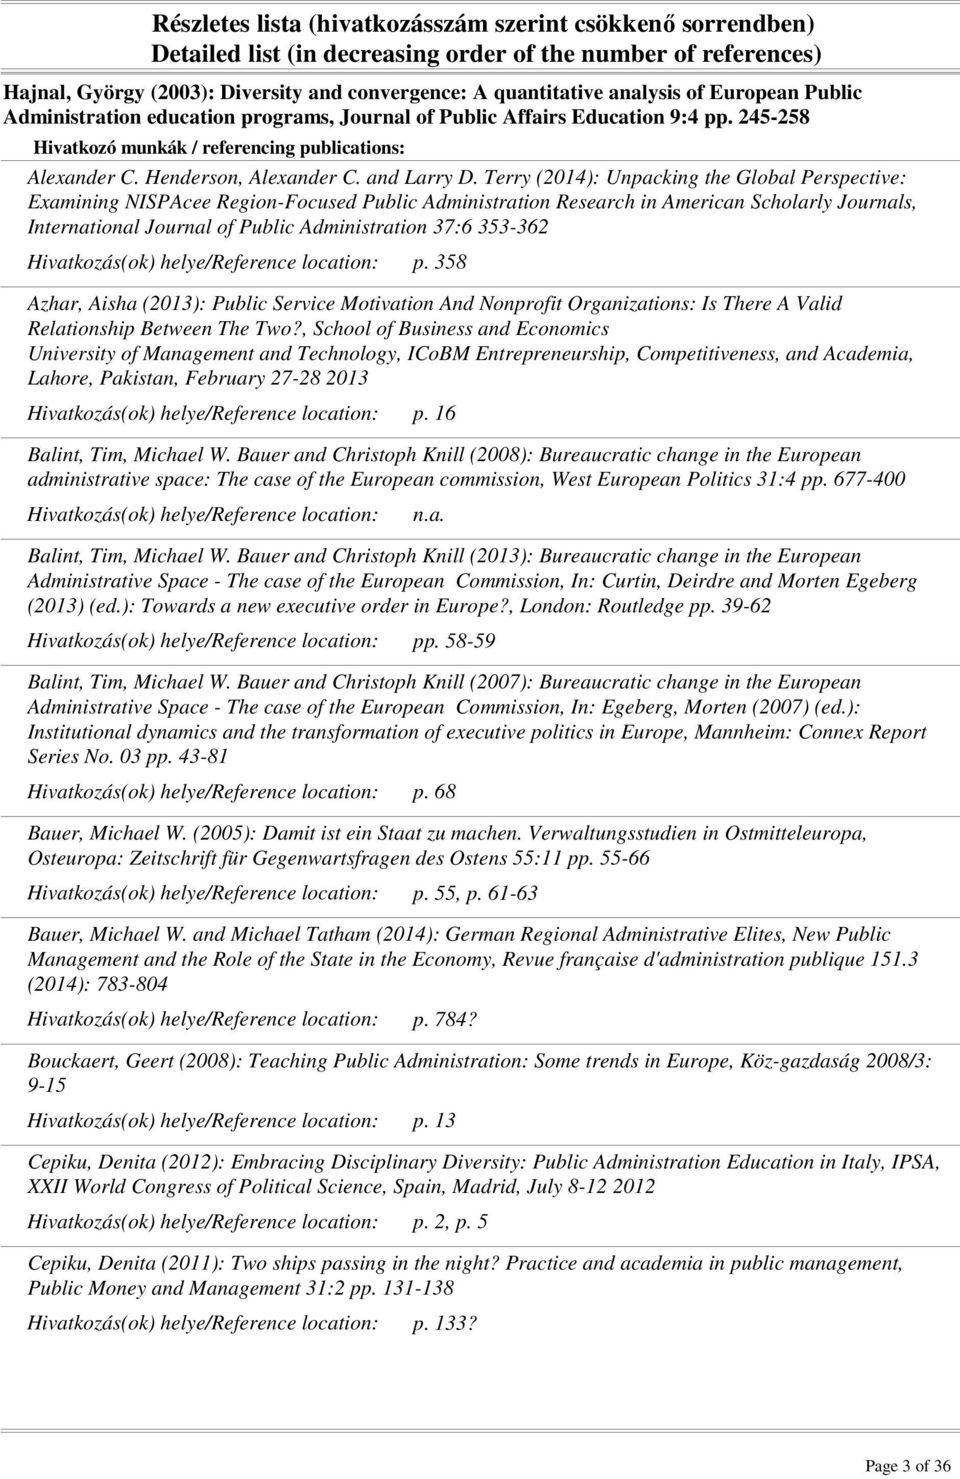 Terry (2014): Unpacking the Global Perspective: Examining NISPAcee Region-Focused Public Administration Research in American Scholarly Journals, International Journal of Public Administration 37:6